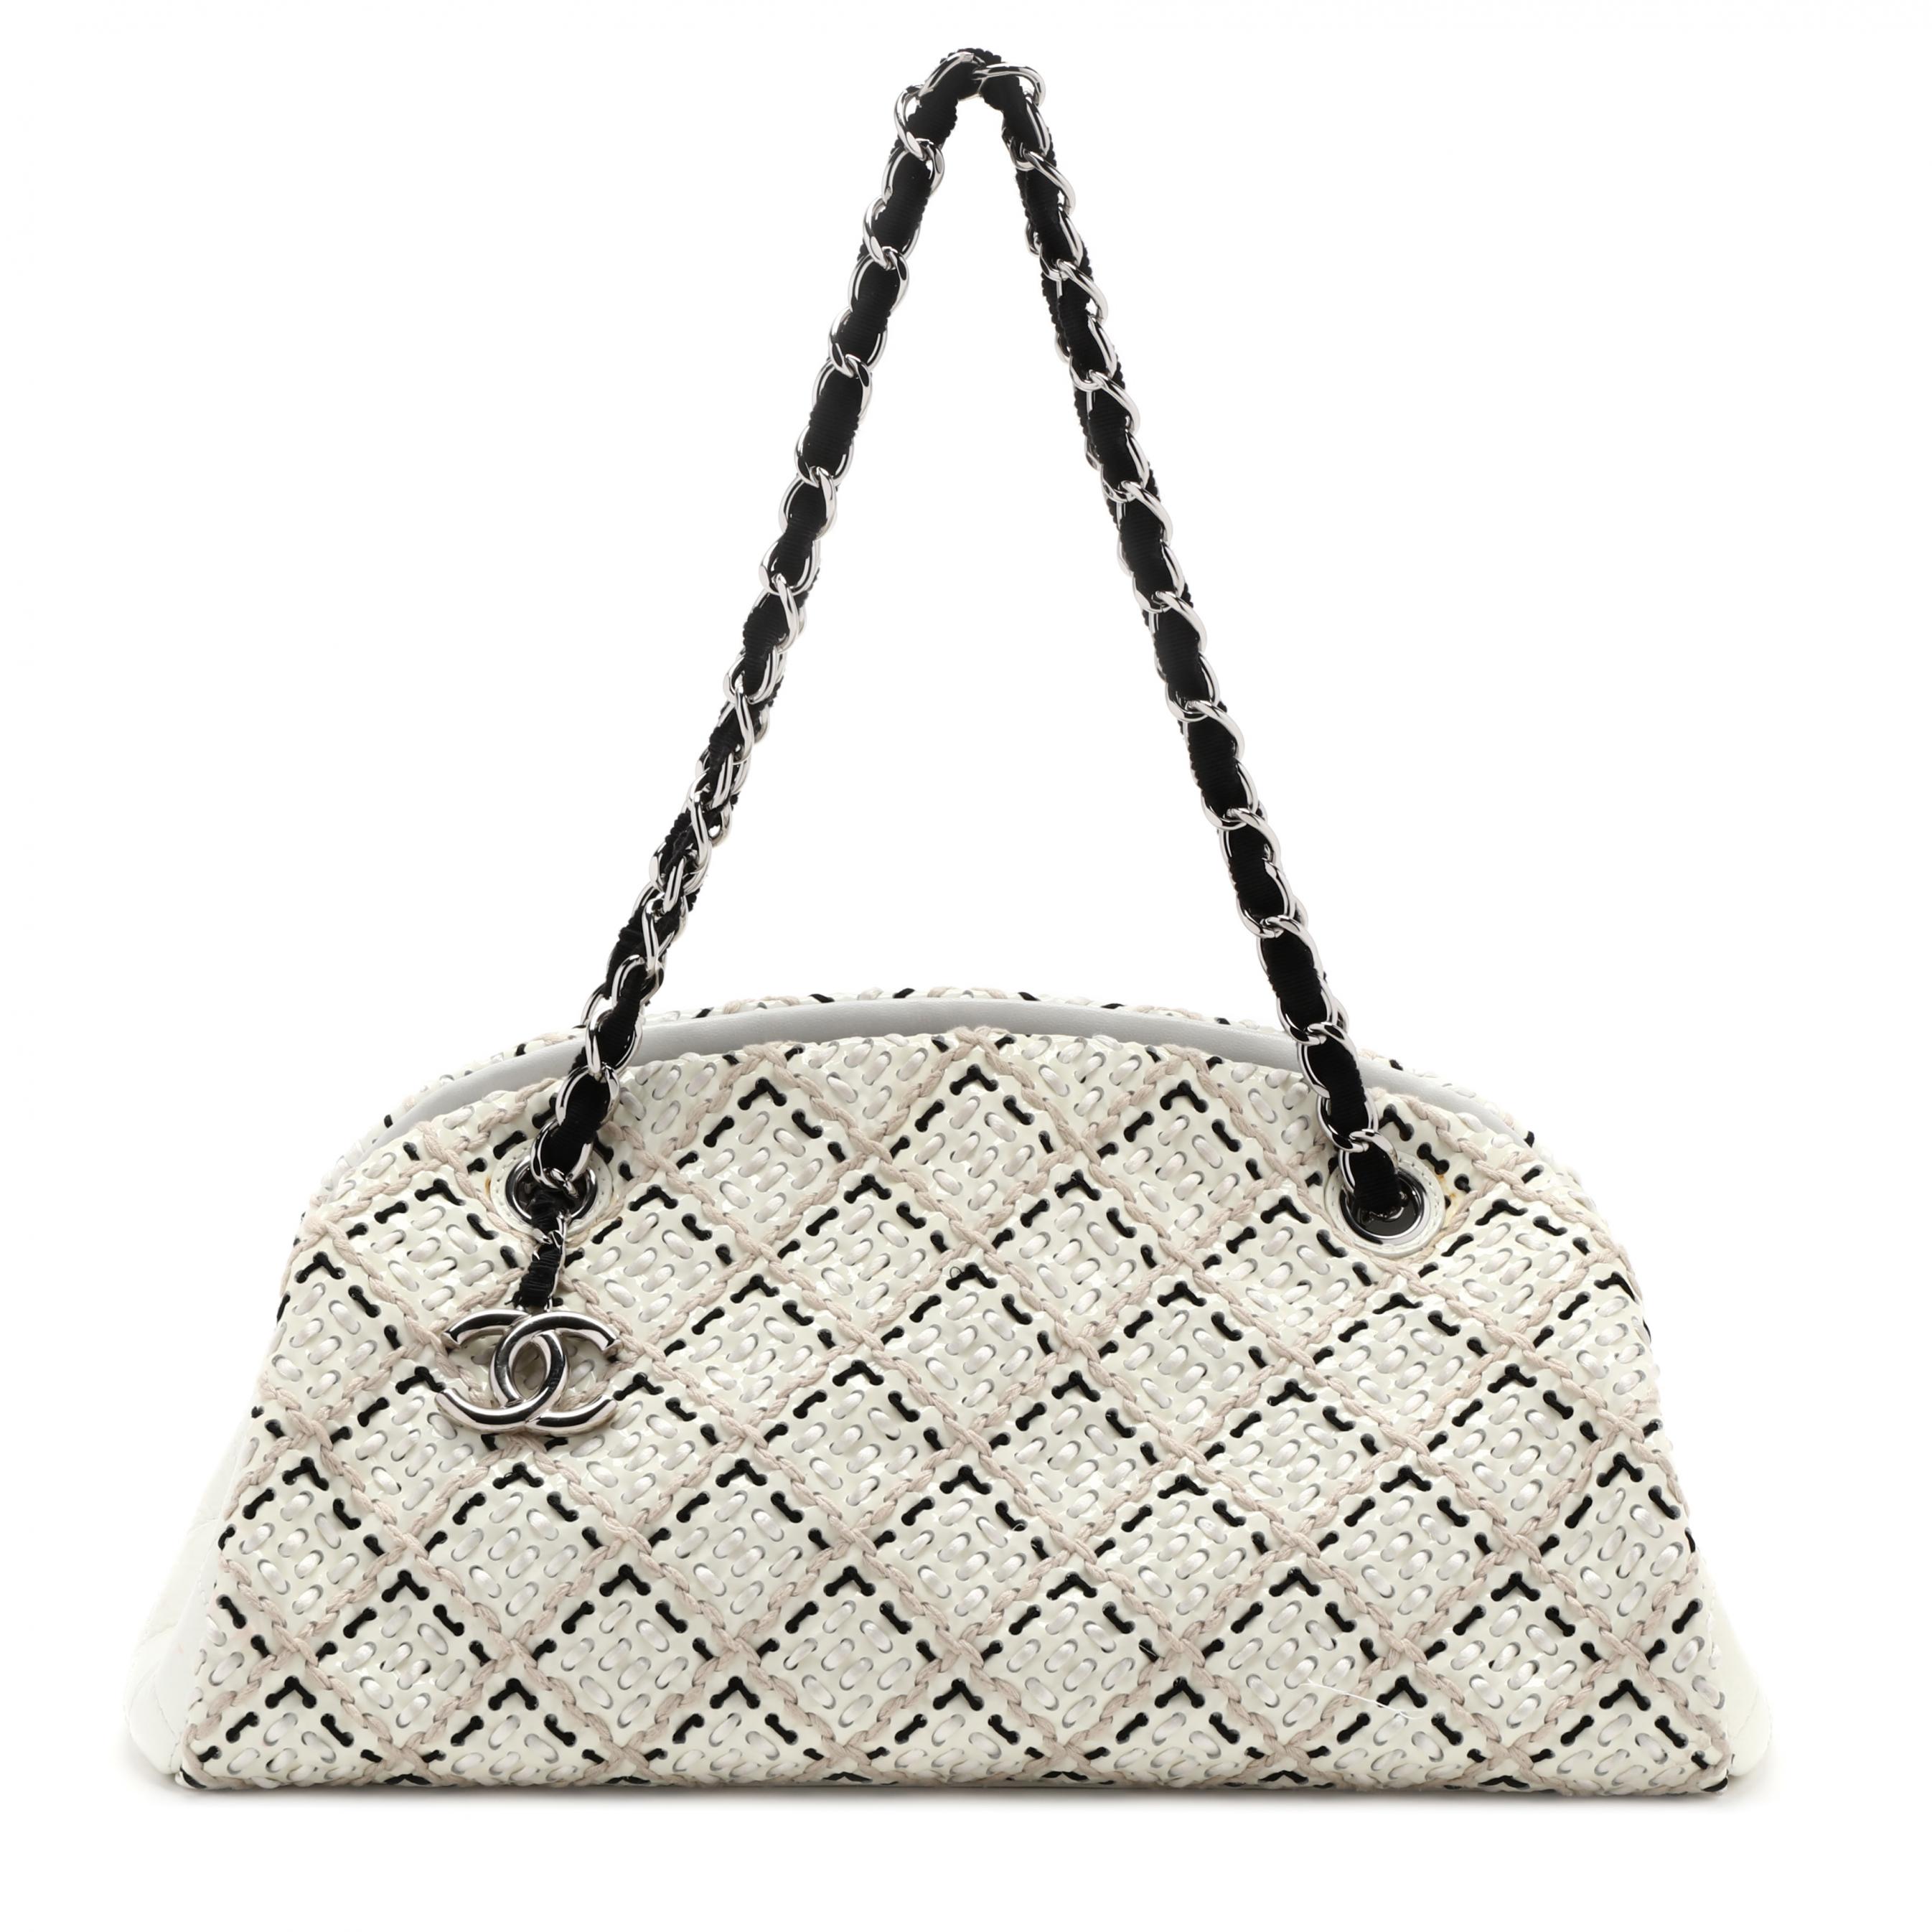 Just Mademoiselle Stitch Bowling Bag, Chanel (Lot 209 - The Signature  Summer AuctionJun 12, 2021, 9:00am)